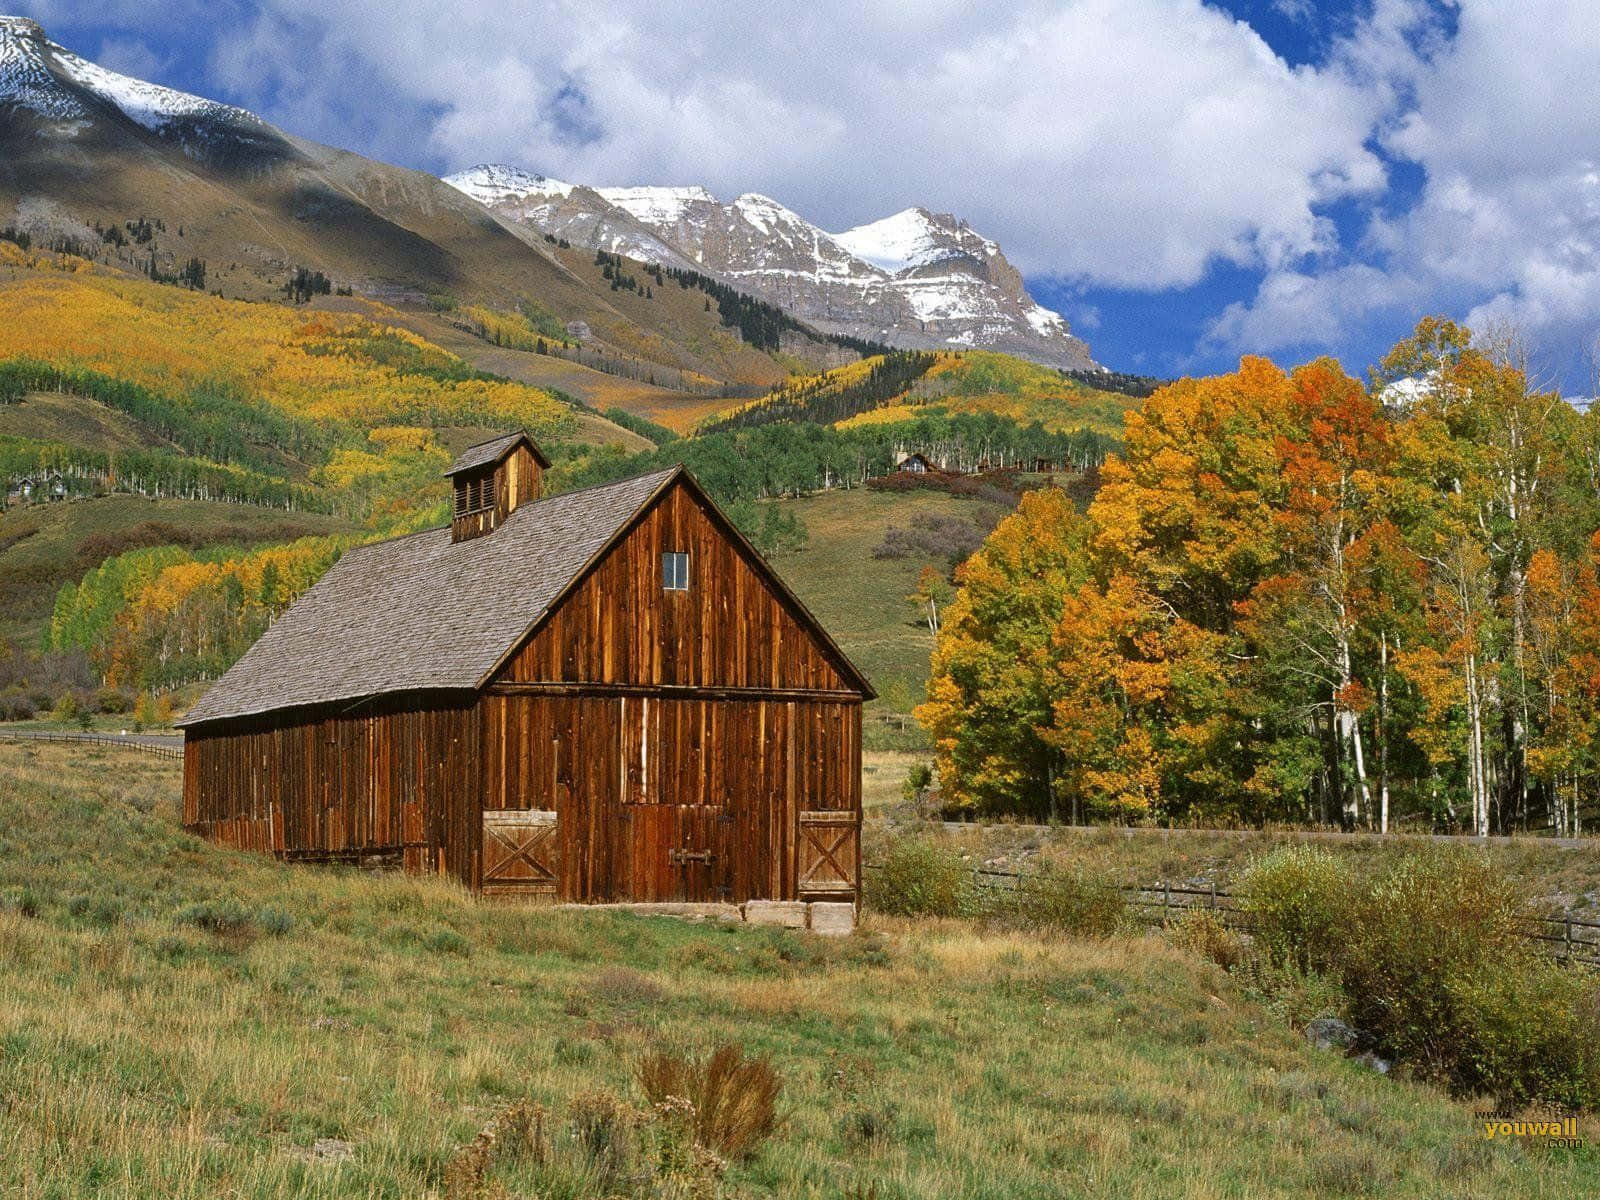 A picturesque Fall Barn surrounded by vibrant autumn foliage Wallpaper